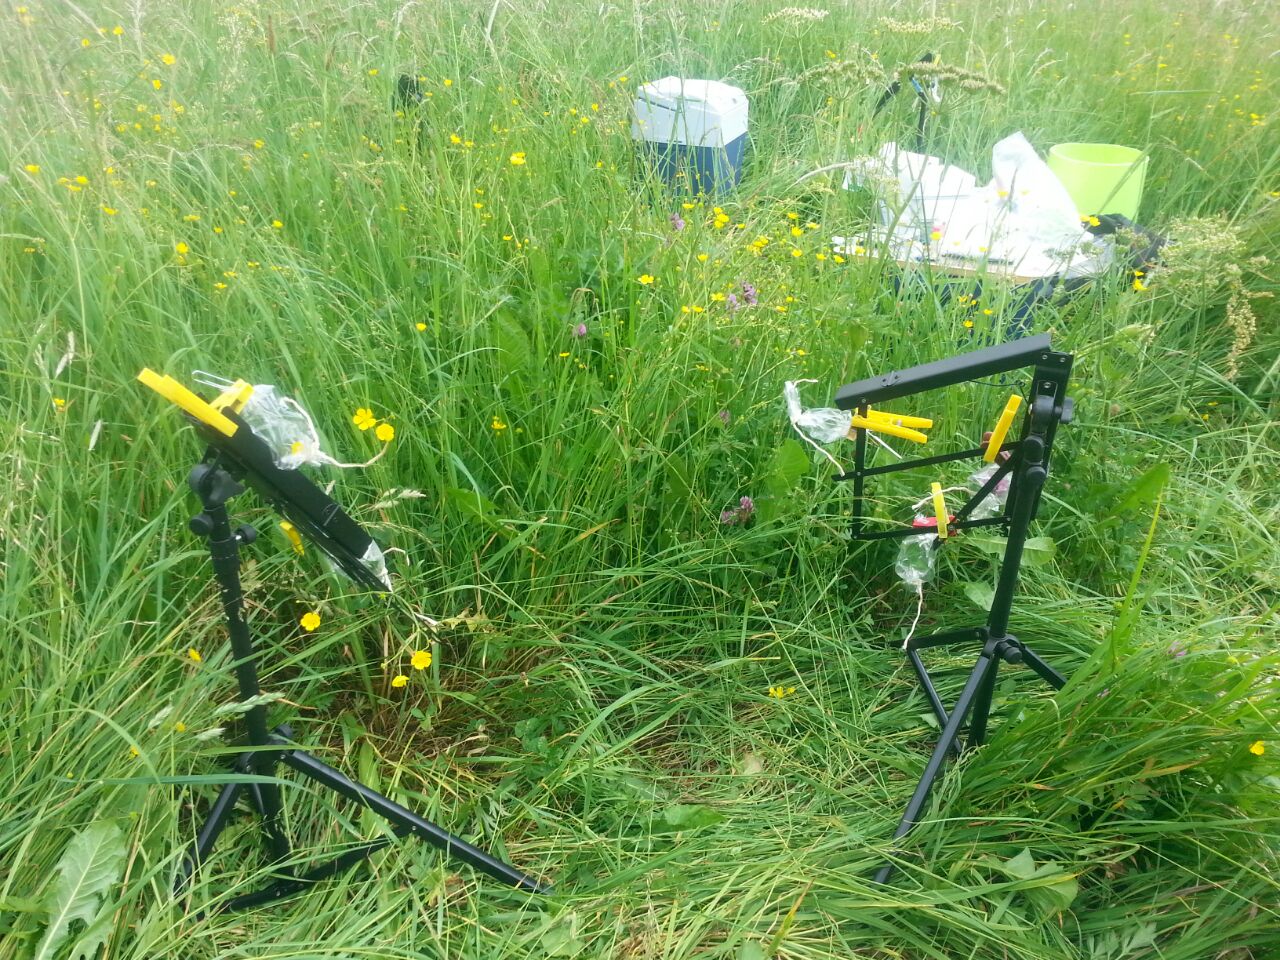 Picture: The photo shows two black music stands set up in an uncut meadow, which have been misappropriated for collecting the scents of flowers and leaves. The trays for the music sheets hang downwards. Roasting hoses made of transparent plastic foil are attached to the braces of the tray with yellow clothespins. Inside the hoses are short pieces of silicone tubing, to the surfaces of which the plant scent molecules adhere